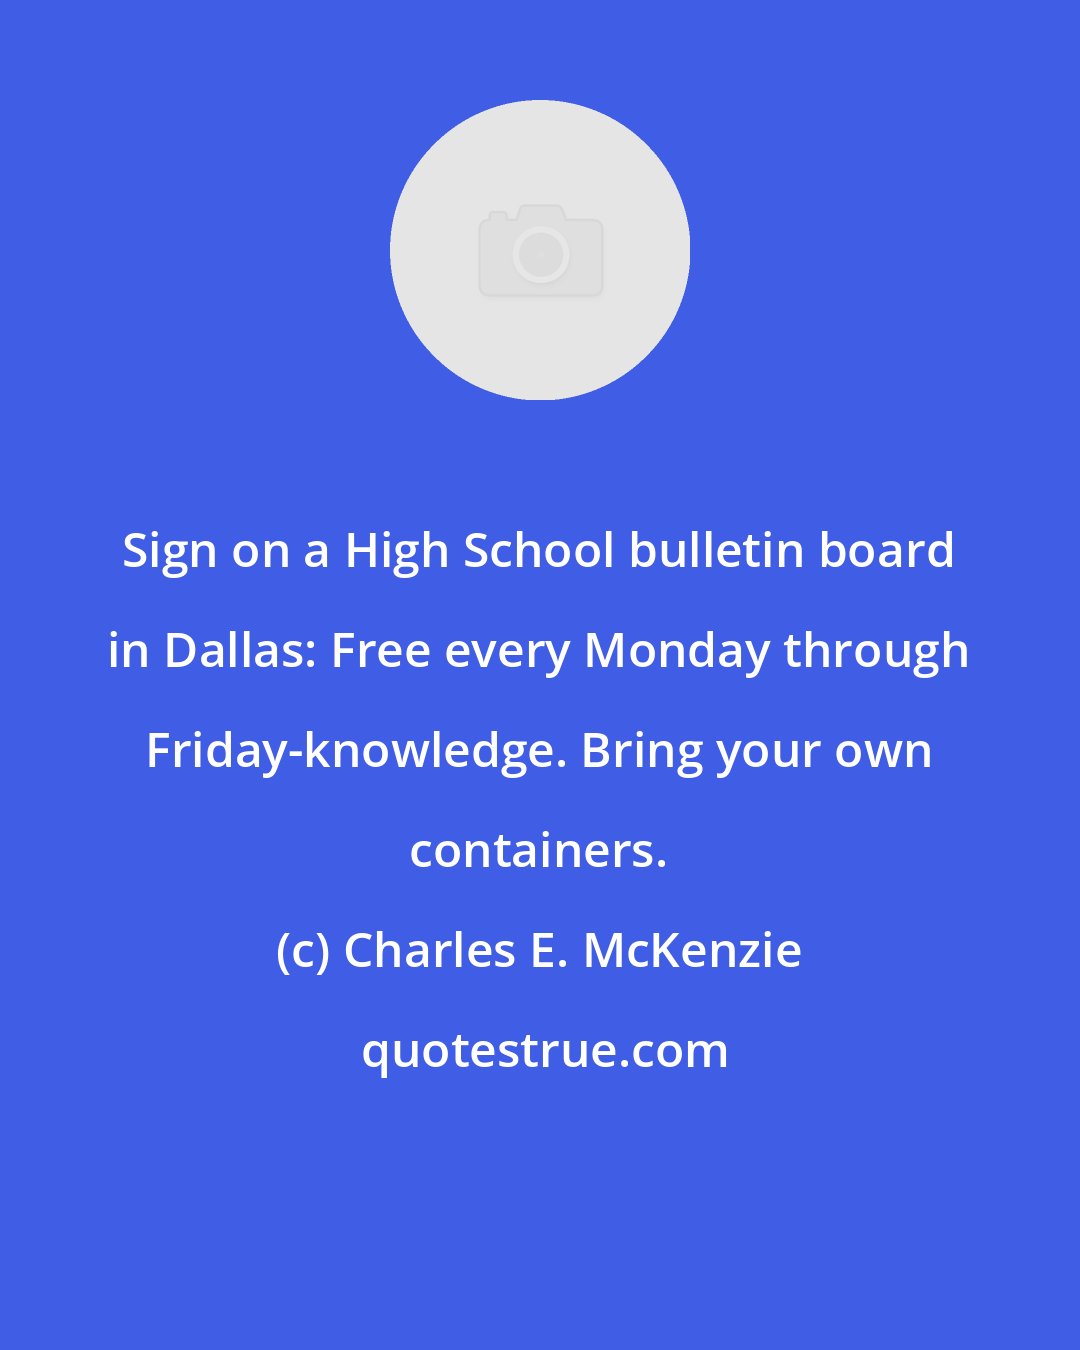 Charles E. McKenzie: Sign on a High School bulletin board in Dallas: Free every Monday through Friday-knowledge. Bring your own containers.